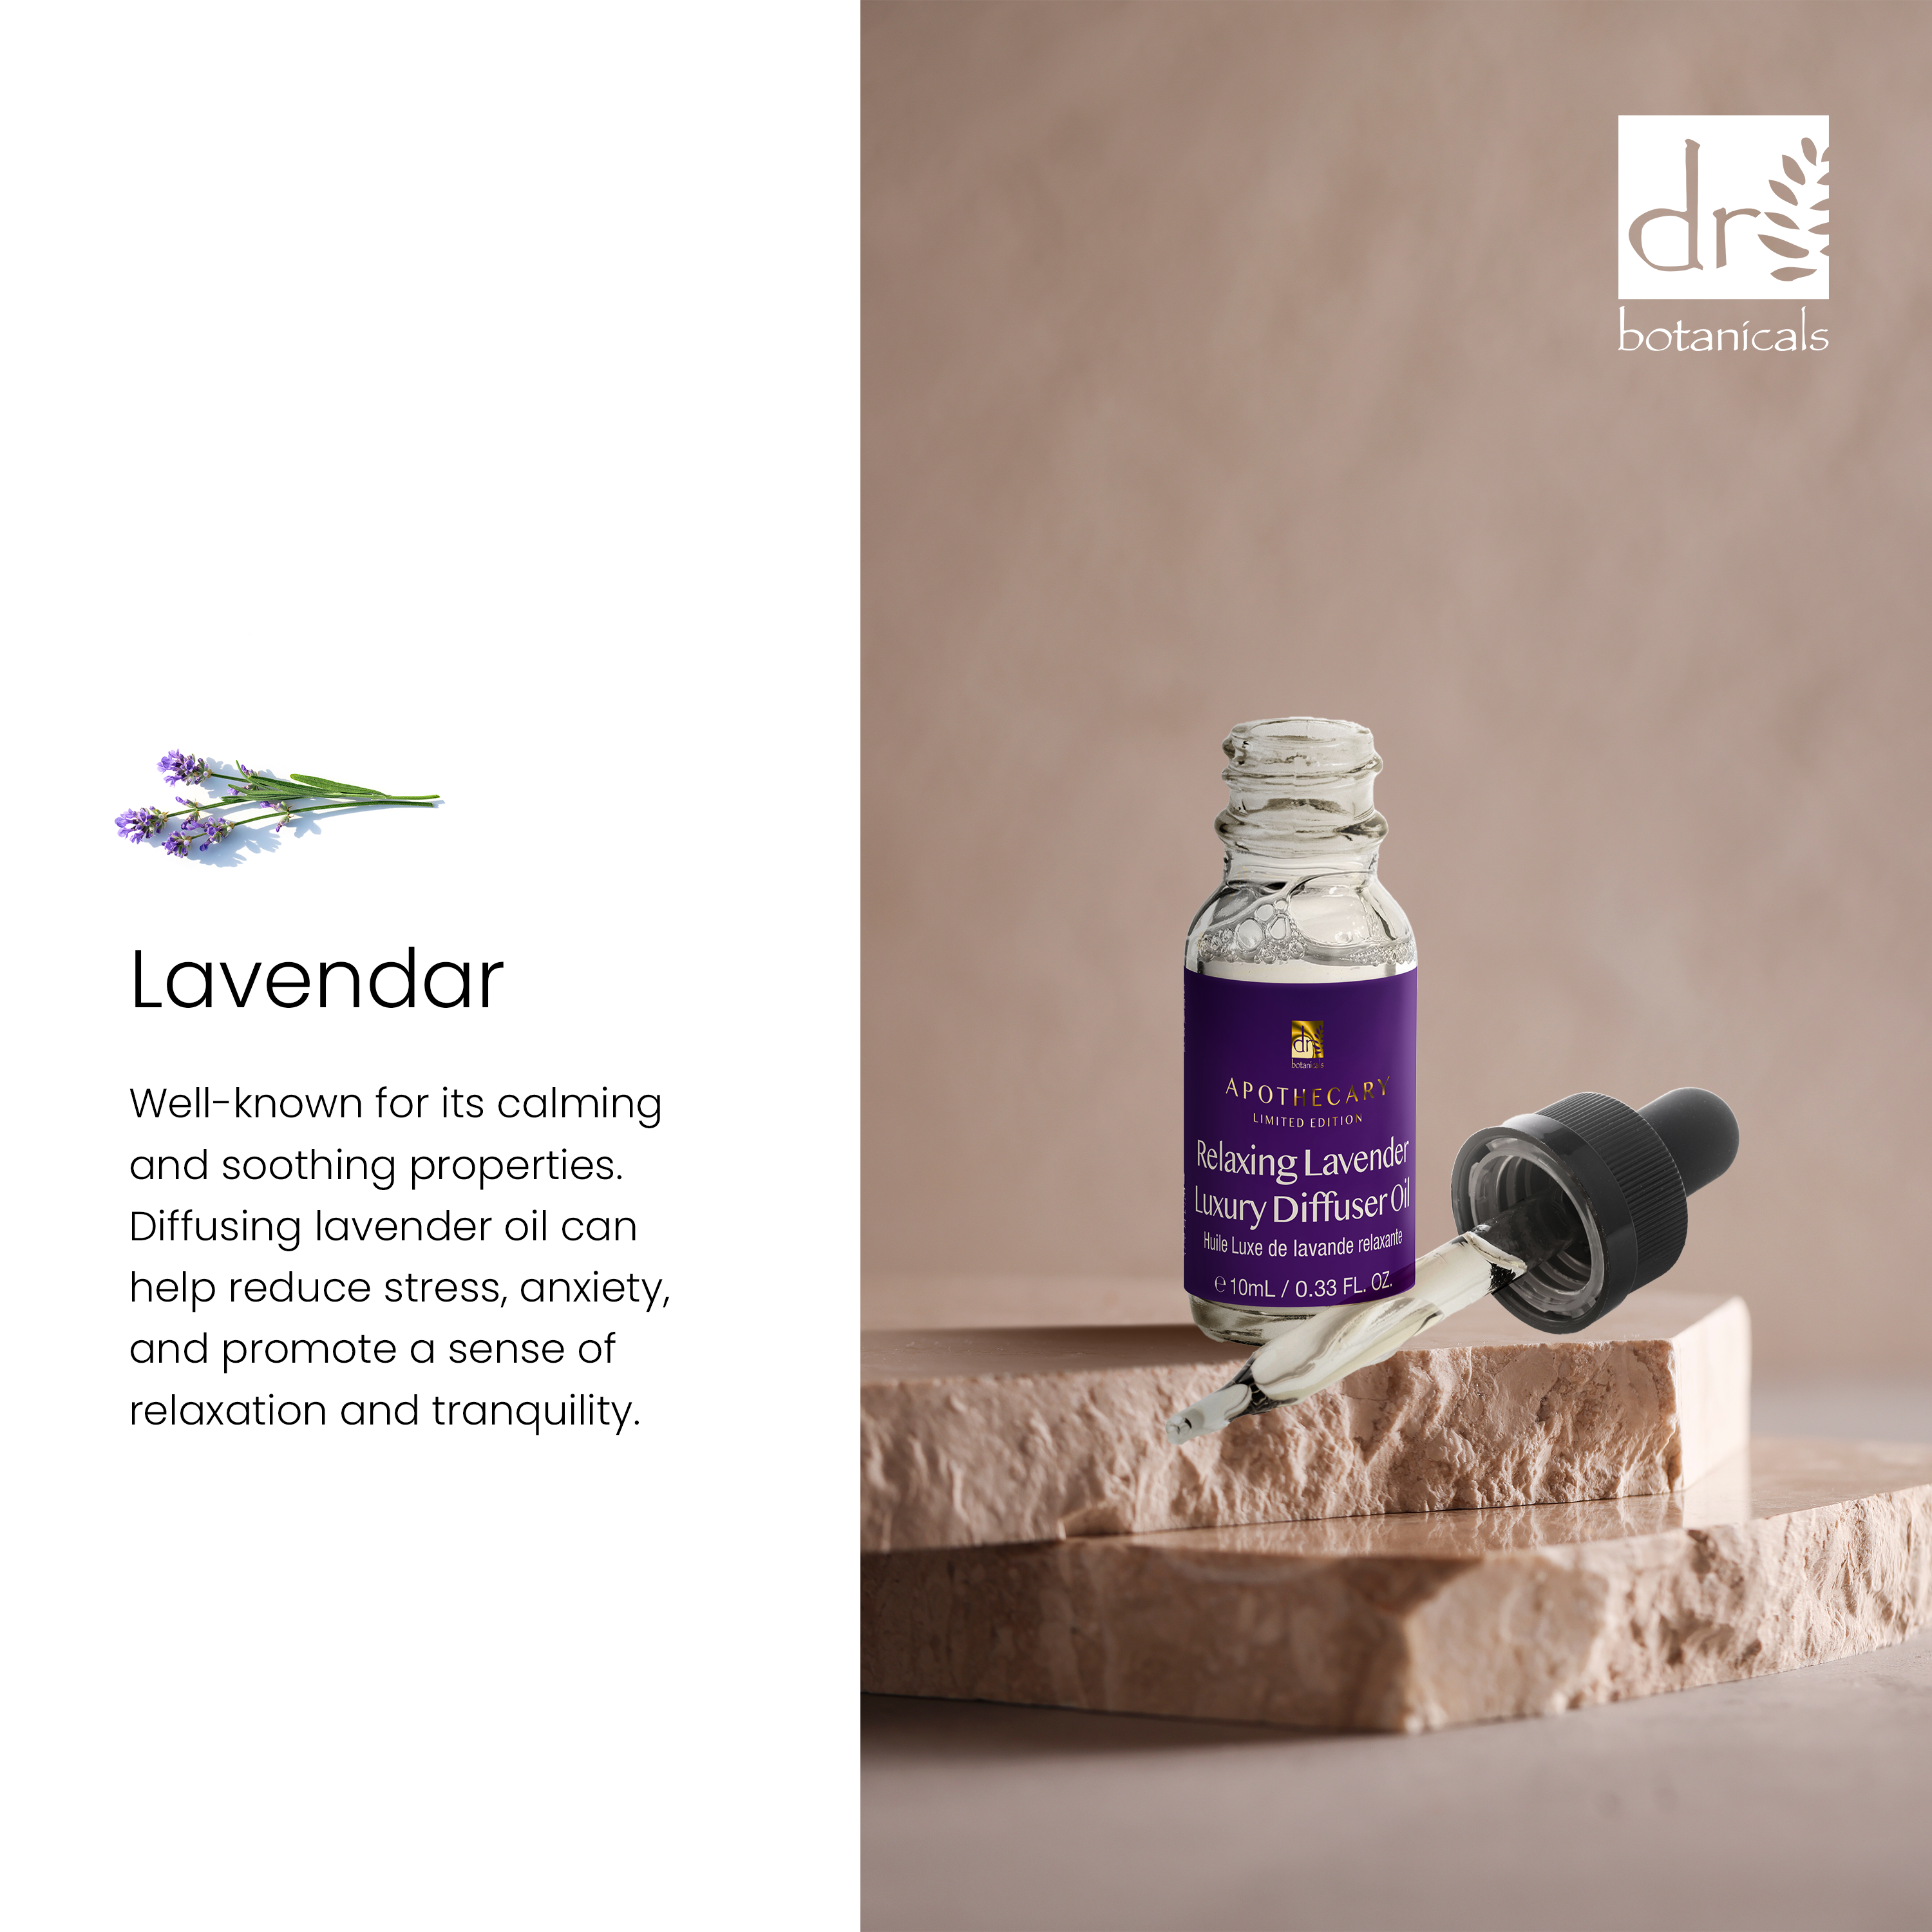 Relaxing Lavender Luxury Diffuser Oil 10ml